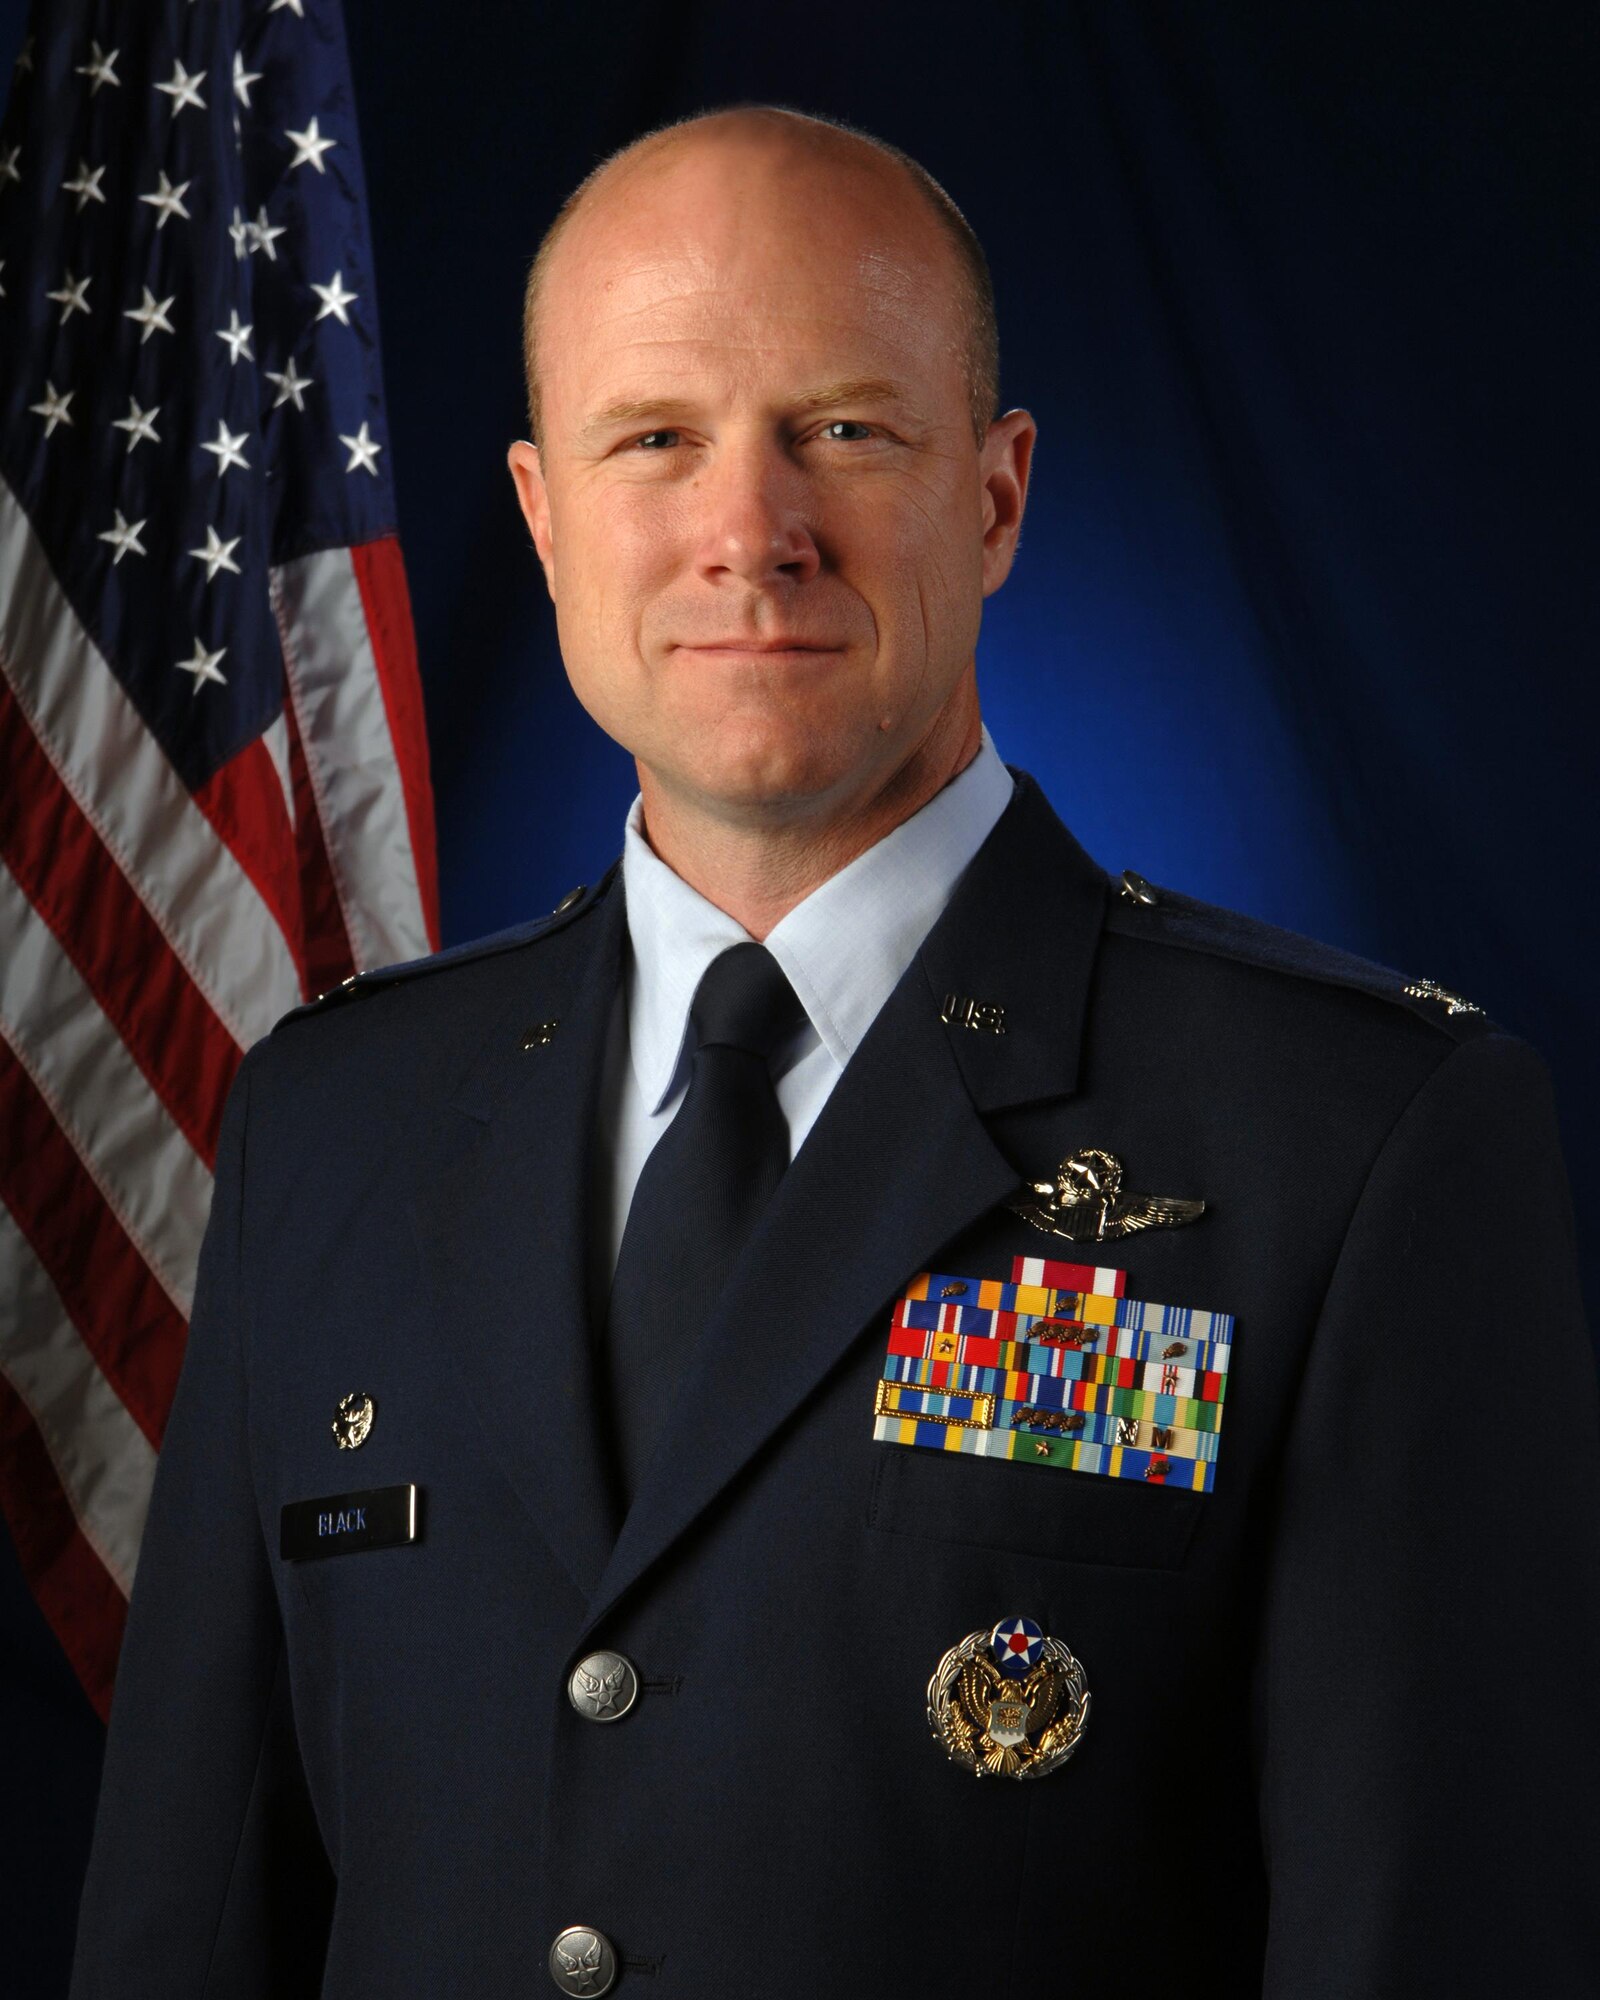 U.S. Air Force Col. Edward Black has been named the new commander of the 139th Airlift Wing, Missouri Air National Guard, at Rosecrans Air National Guard Base, St. Joseph, Mo., May 19, 2017. Black will assume command from Col. Ralph Schwader who will move to Missouri National Guard Headquarters in Jefferson City.  (U.S. Air National Guard photo by Master Sgt. Erin Hickok)